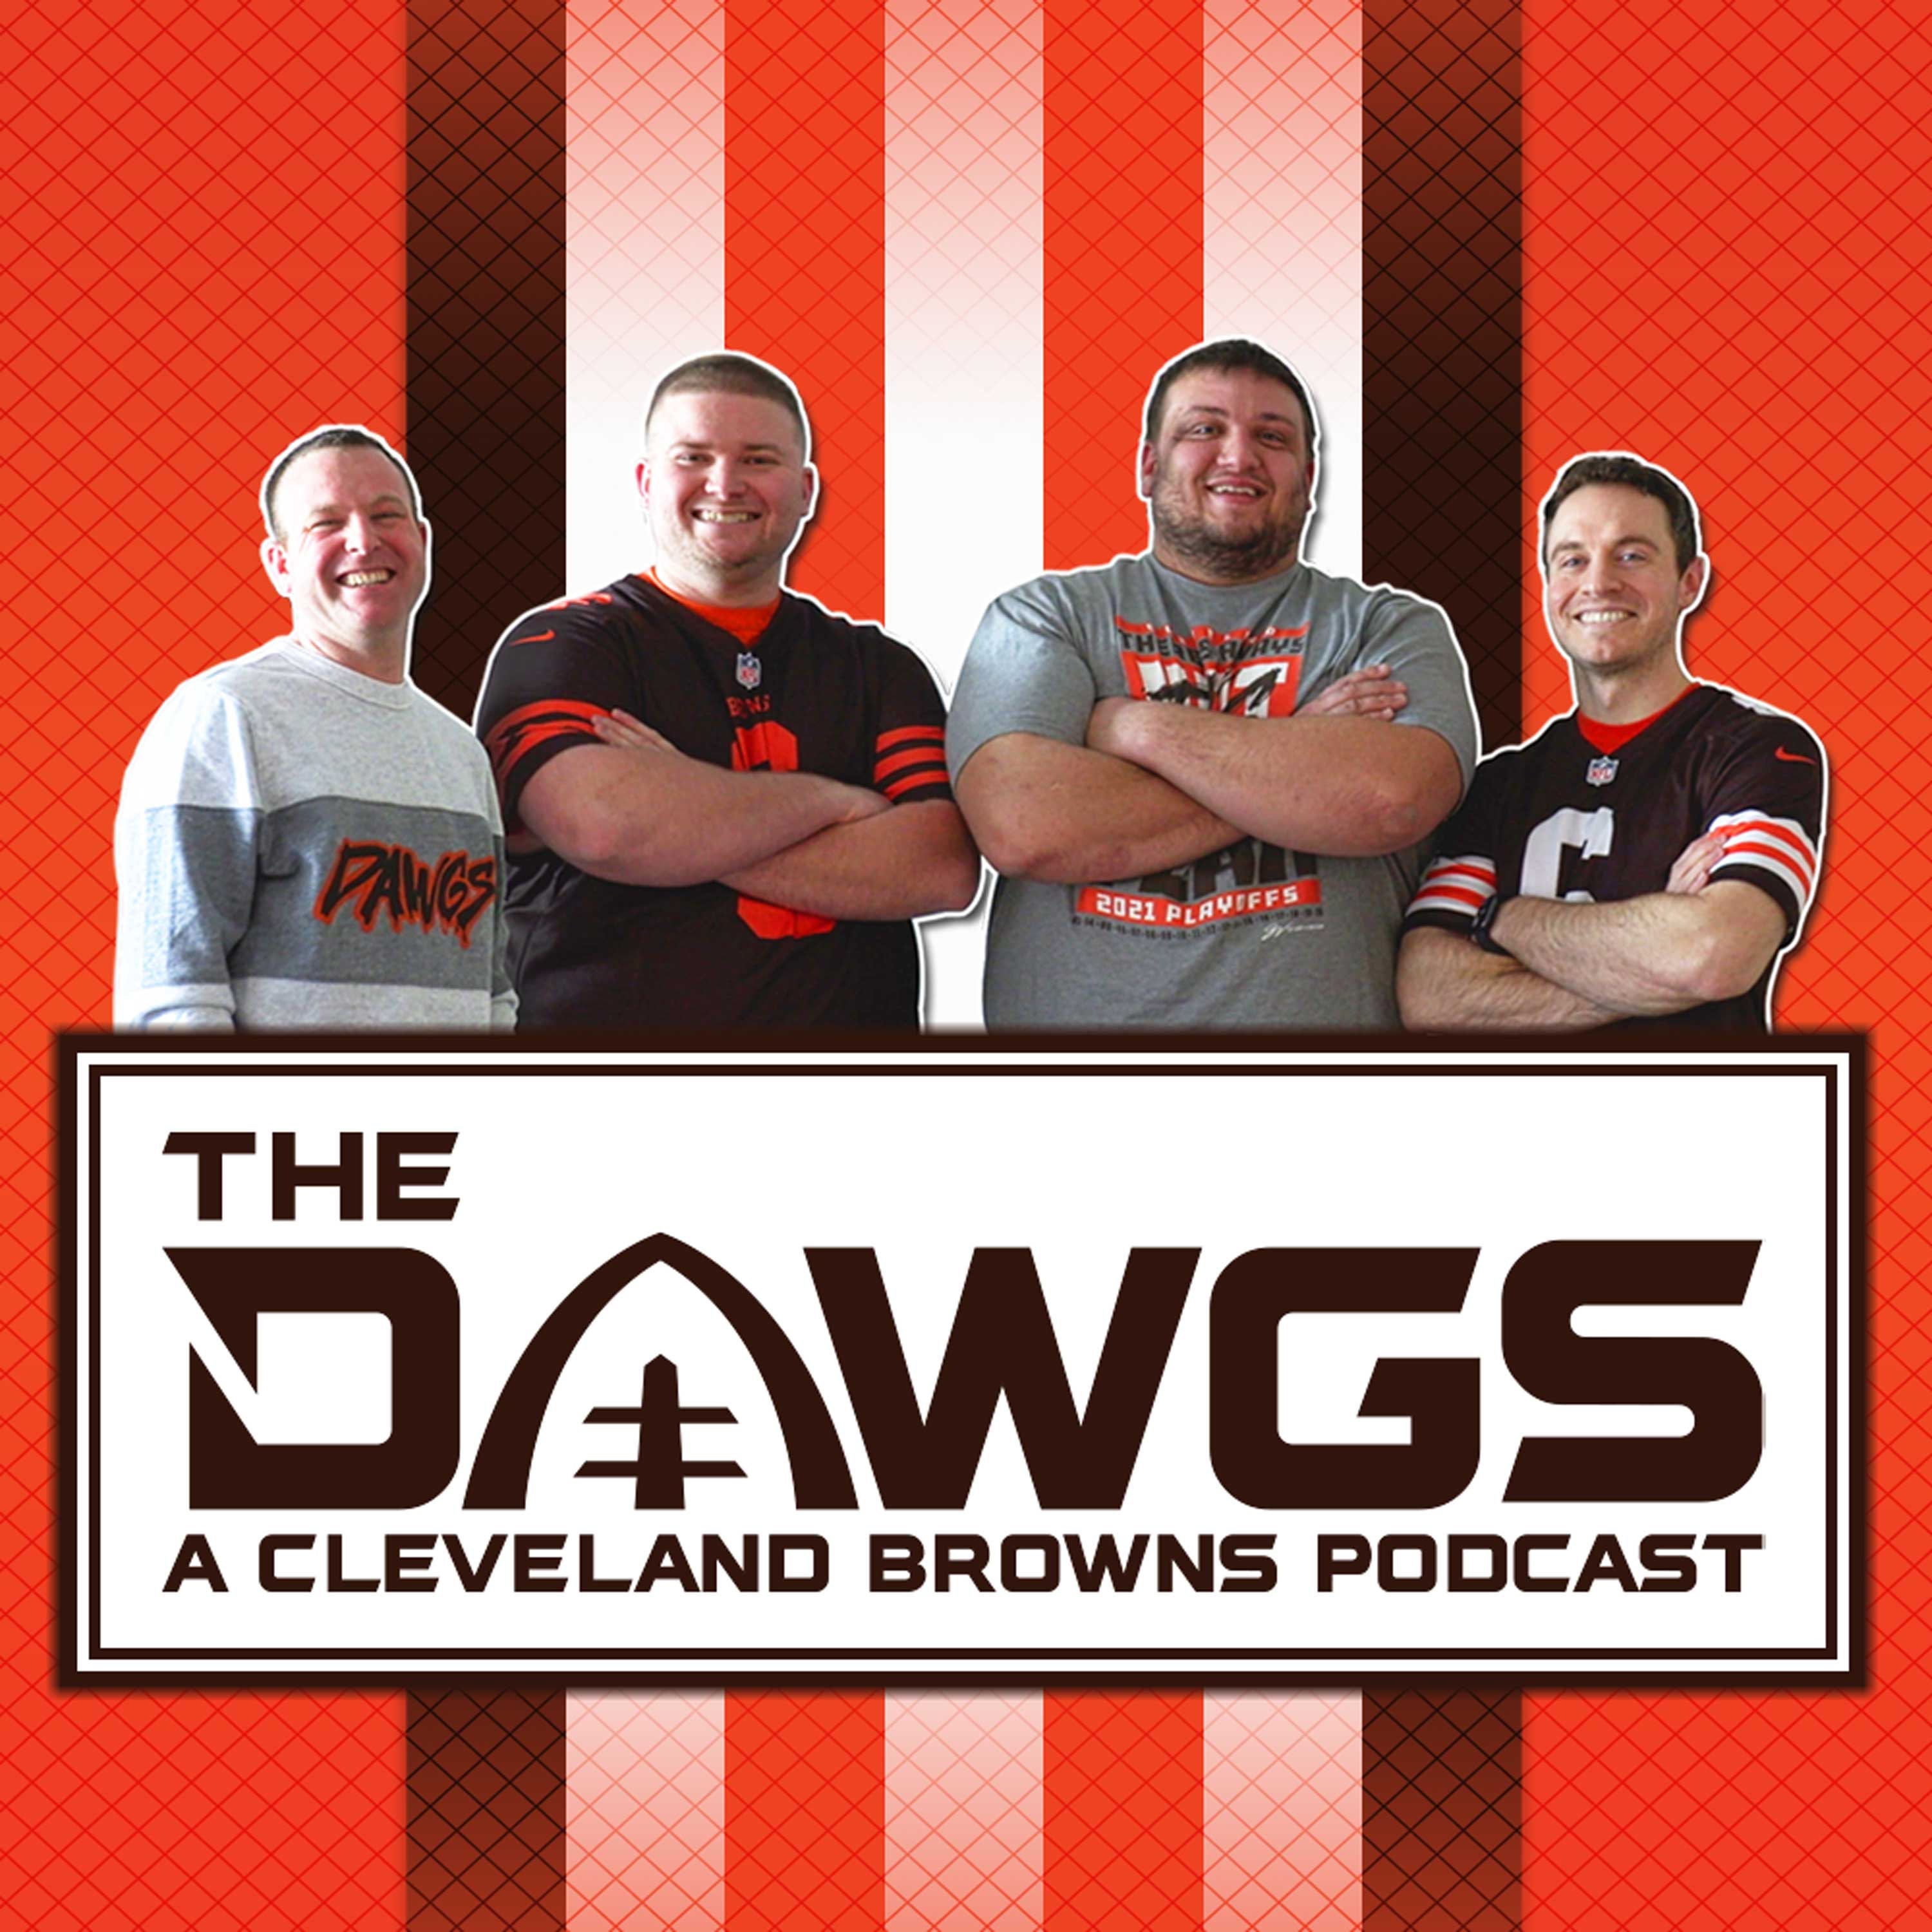 Week 17 Preview: Browns at Steelers | The Dawgs - A Cleveland Browns Podcast - December 31, 2021